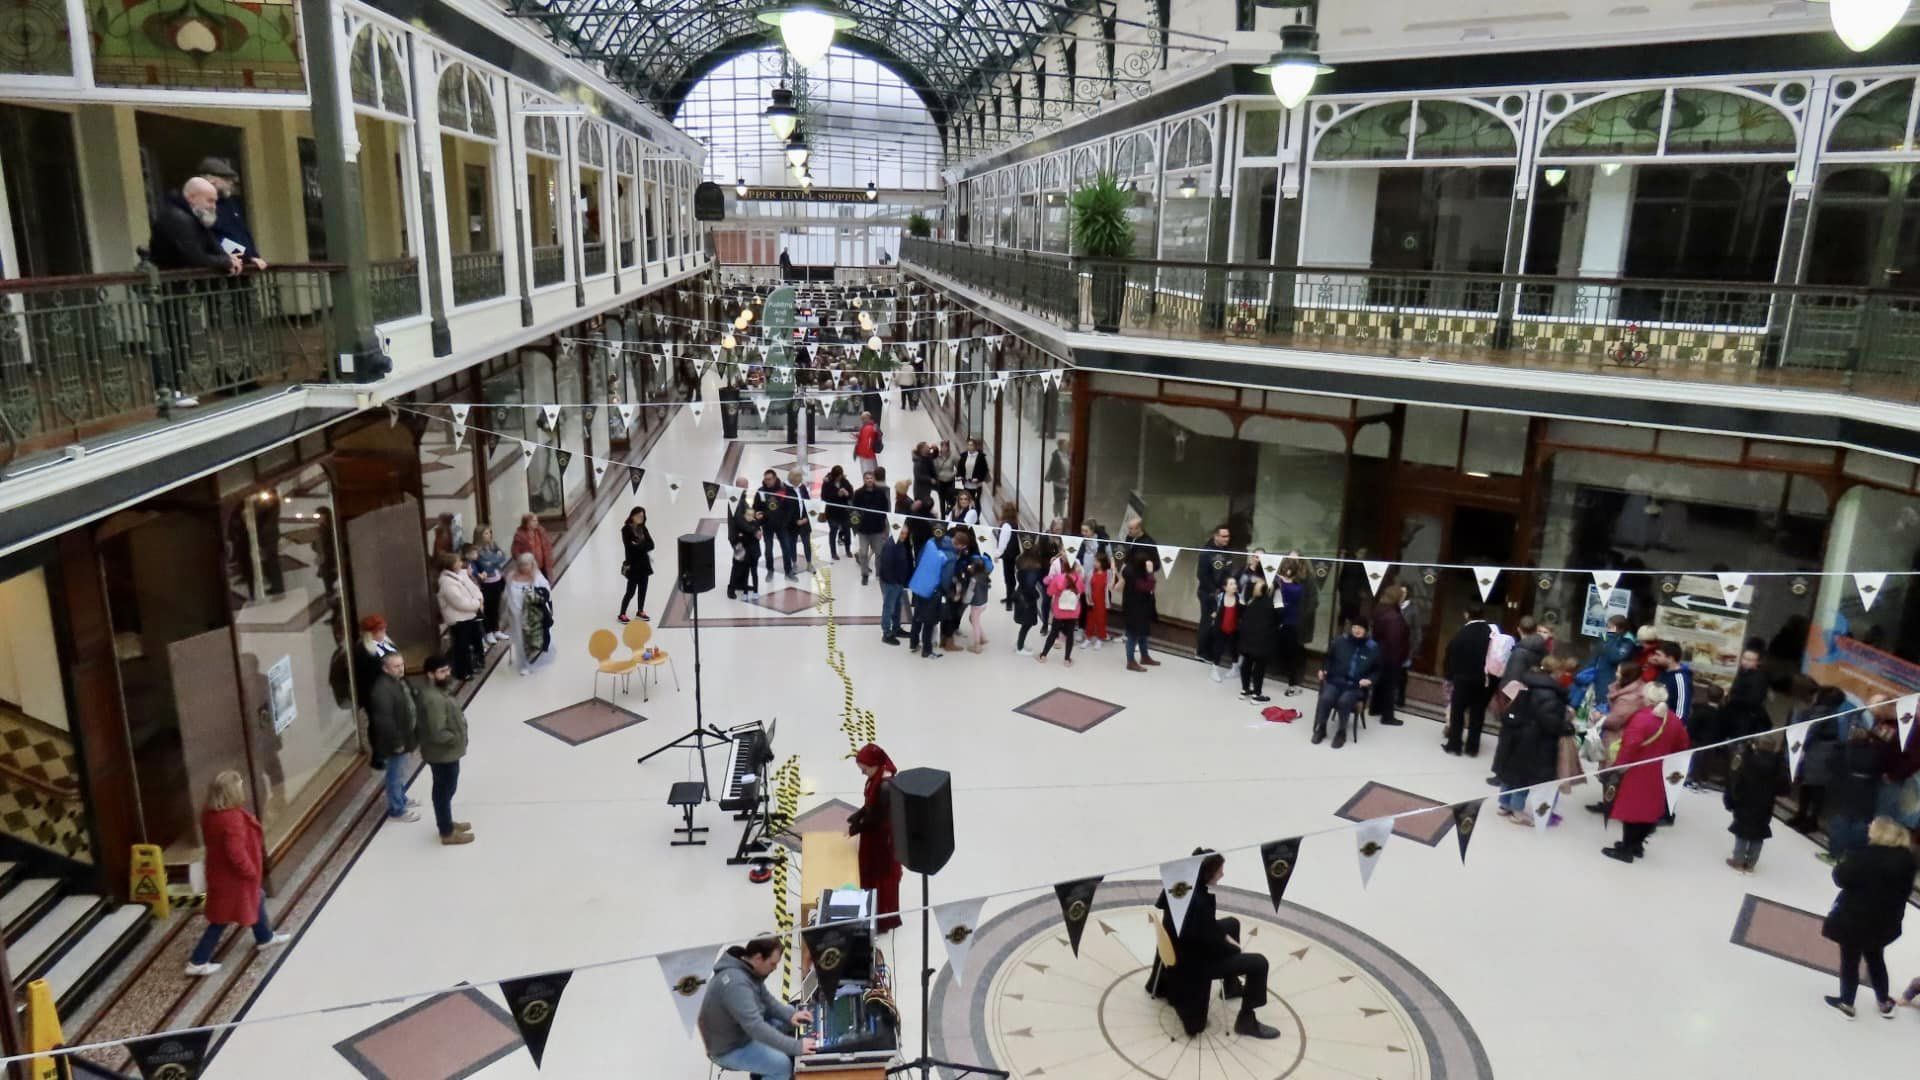 The historic Wayfarers Arcade in Southport has marked its 125th anniversary with a weekend of Victorian celebrations with entertainment from the Gambolling Arena Theatre Company and Wrights Performing Arts. Photo by Andrew Brown Stand Up For Southport